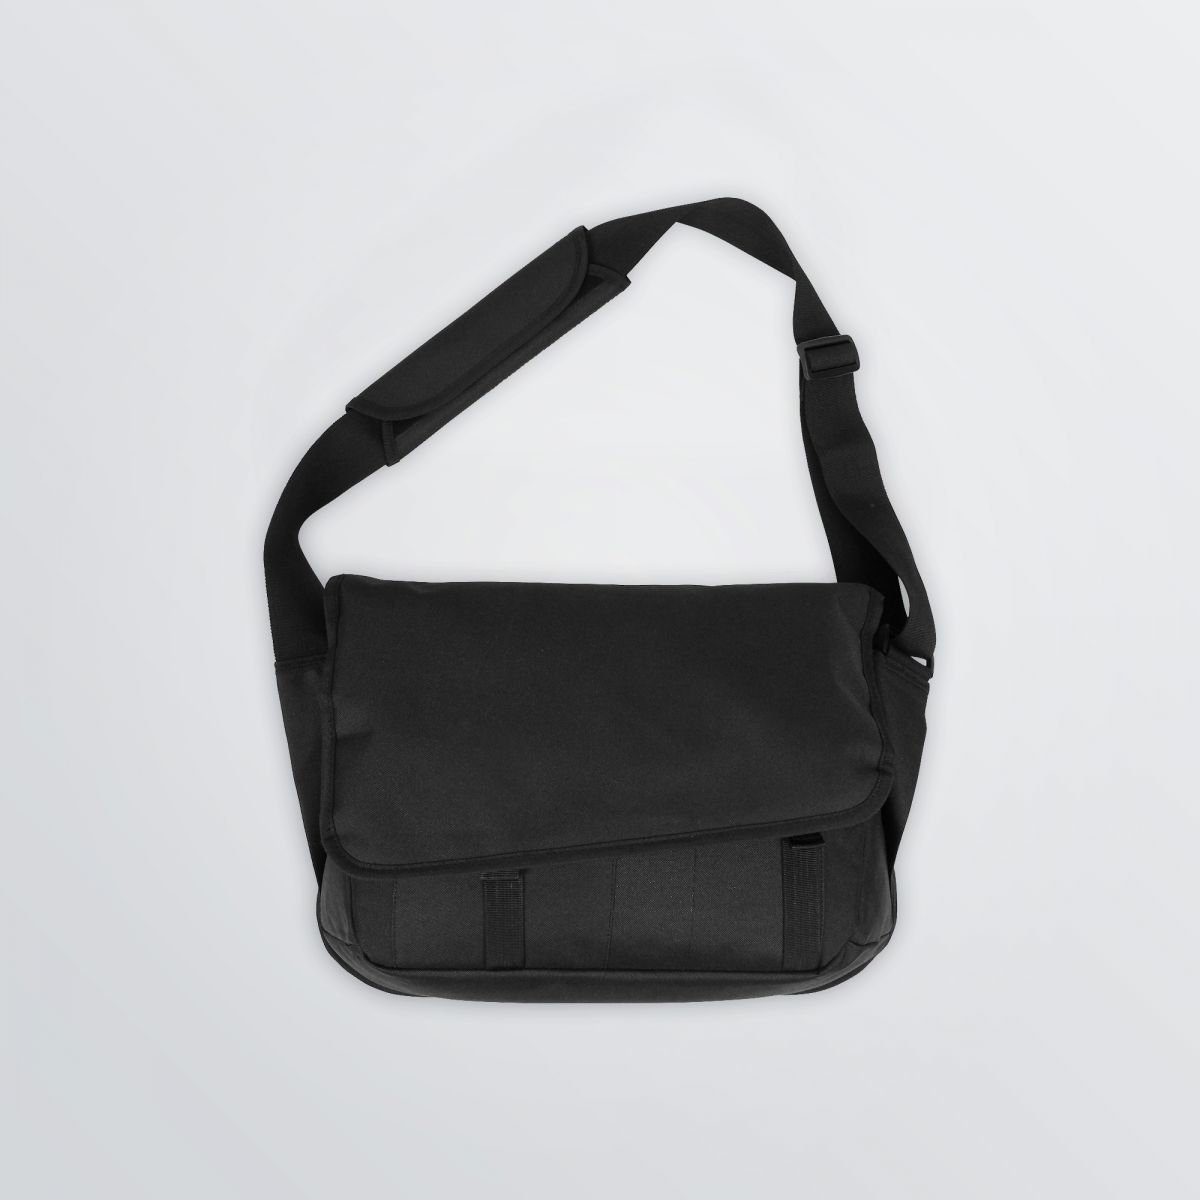 printable universal messengerbag as product example in black colour with shoulder strap